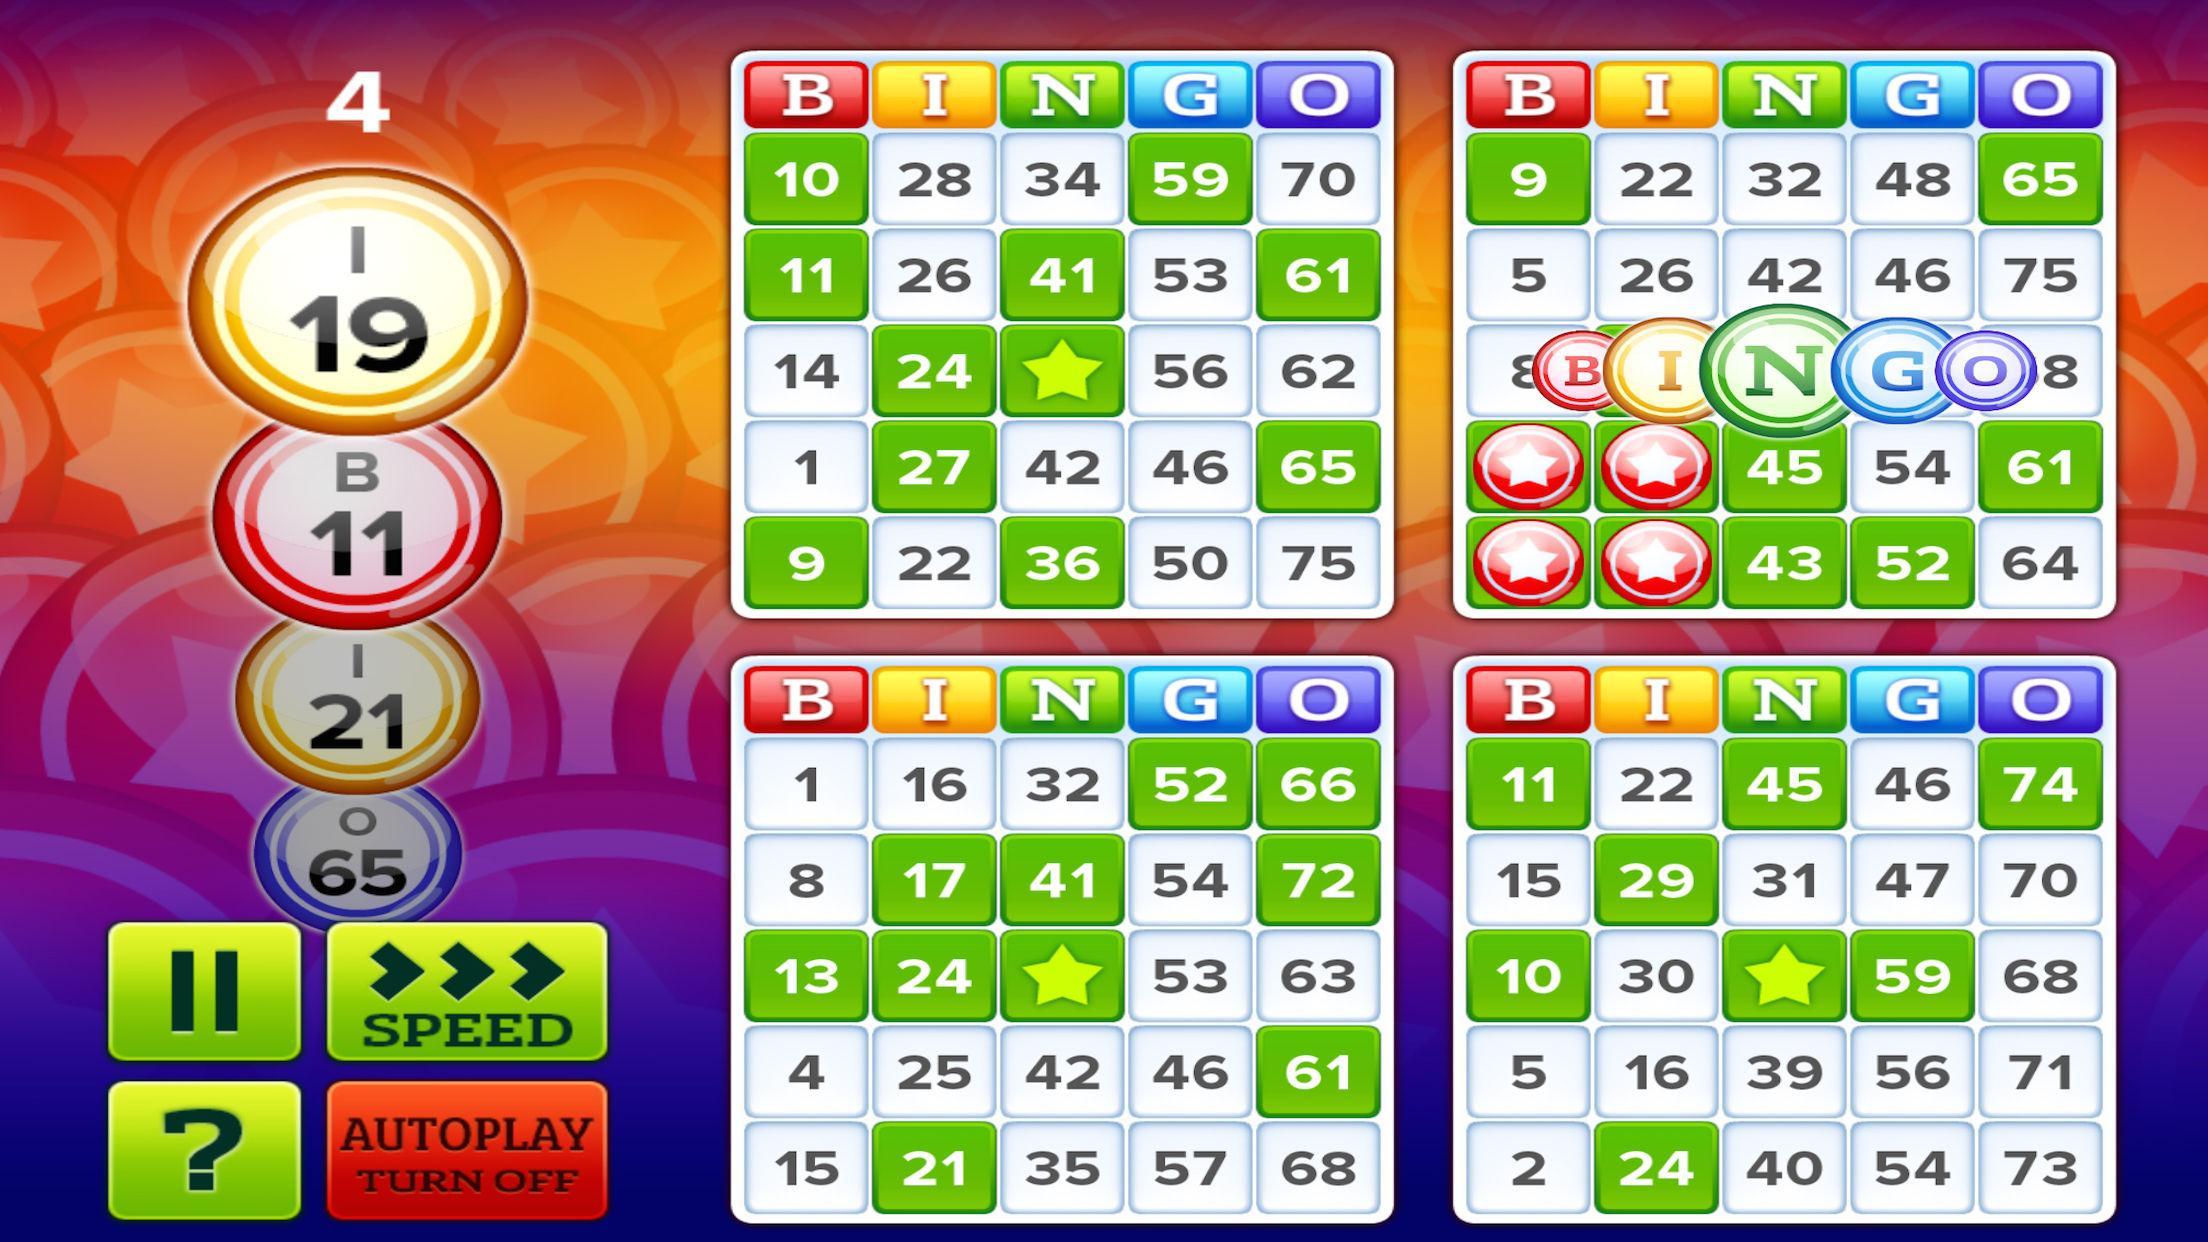 Classic Bingo Hall for Android - APK Download